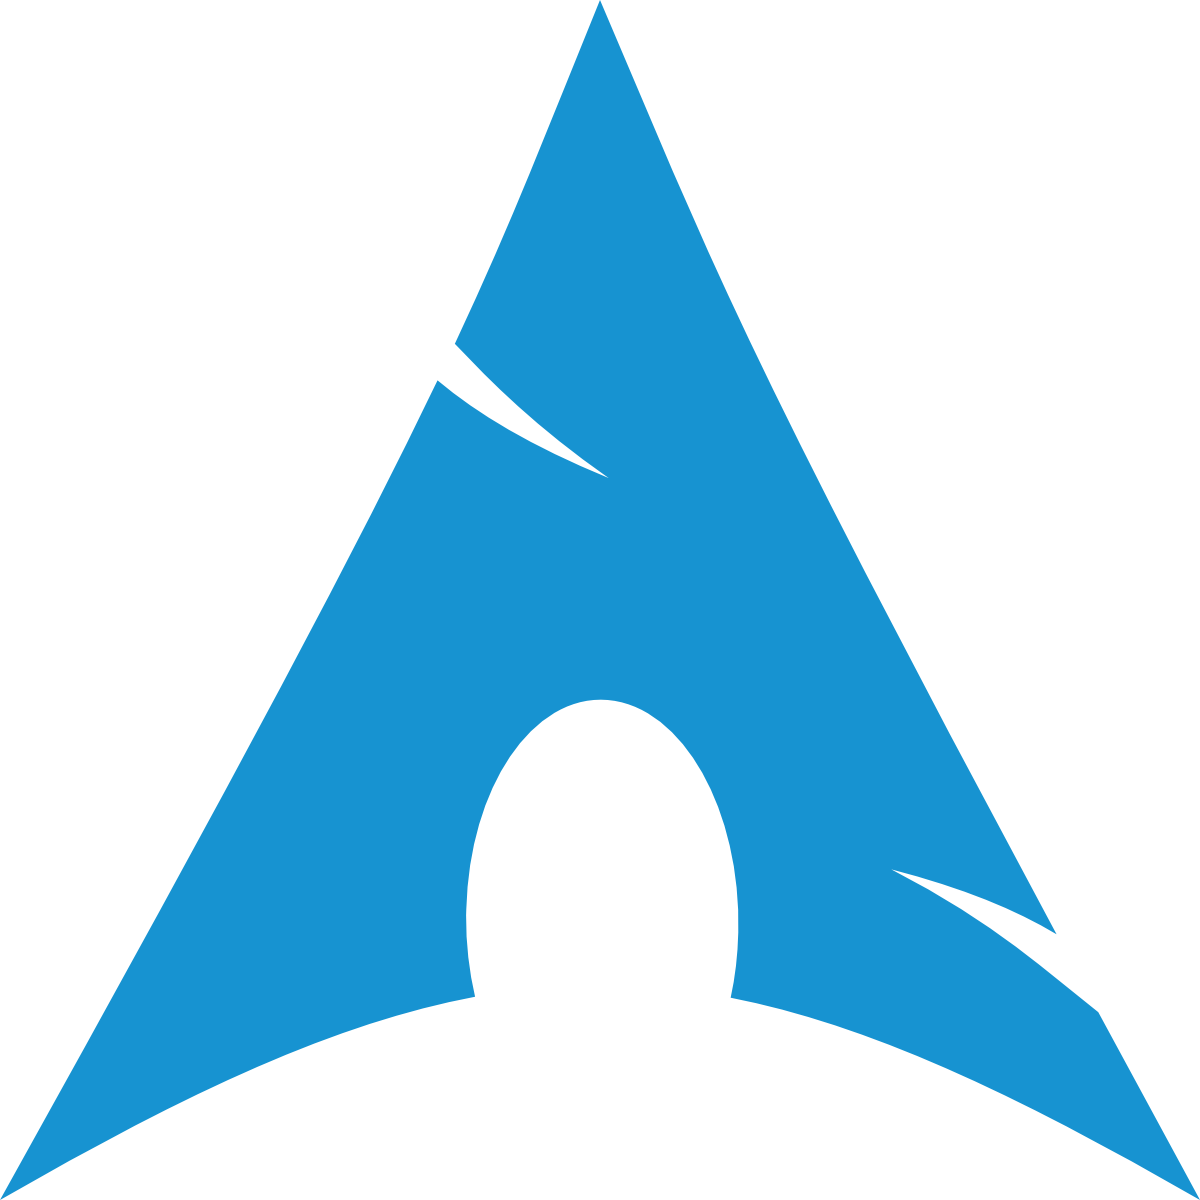 Tgz Arch Linux Free Download PNG HQ PNG Image